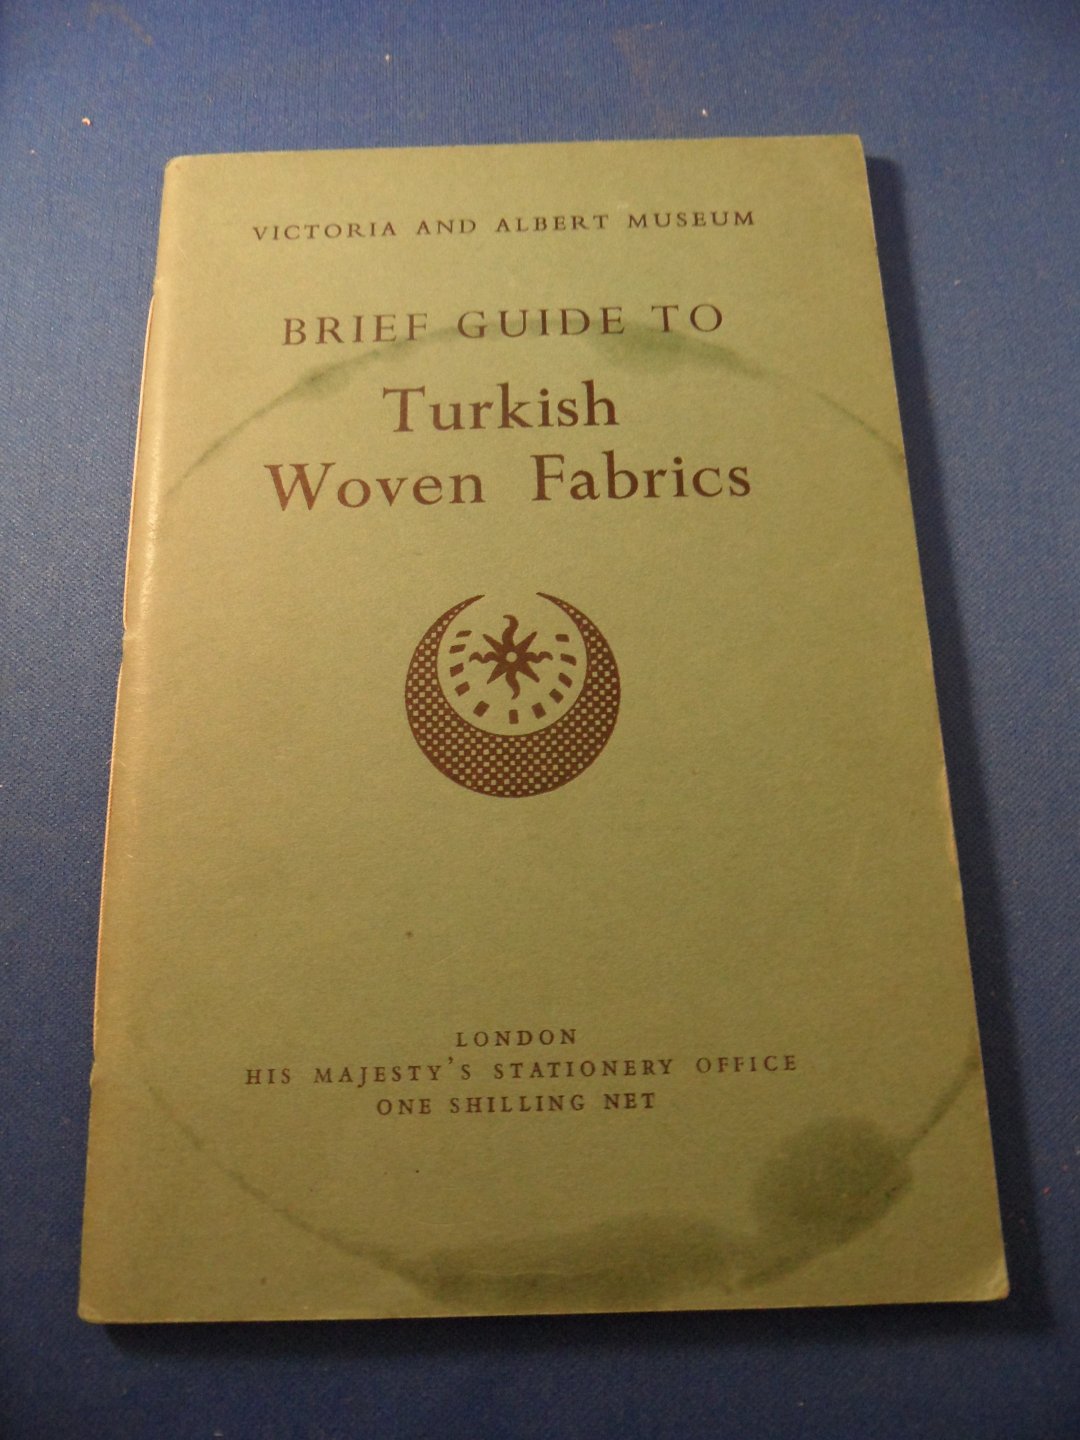  - brief guide to Turkish woven fabrics